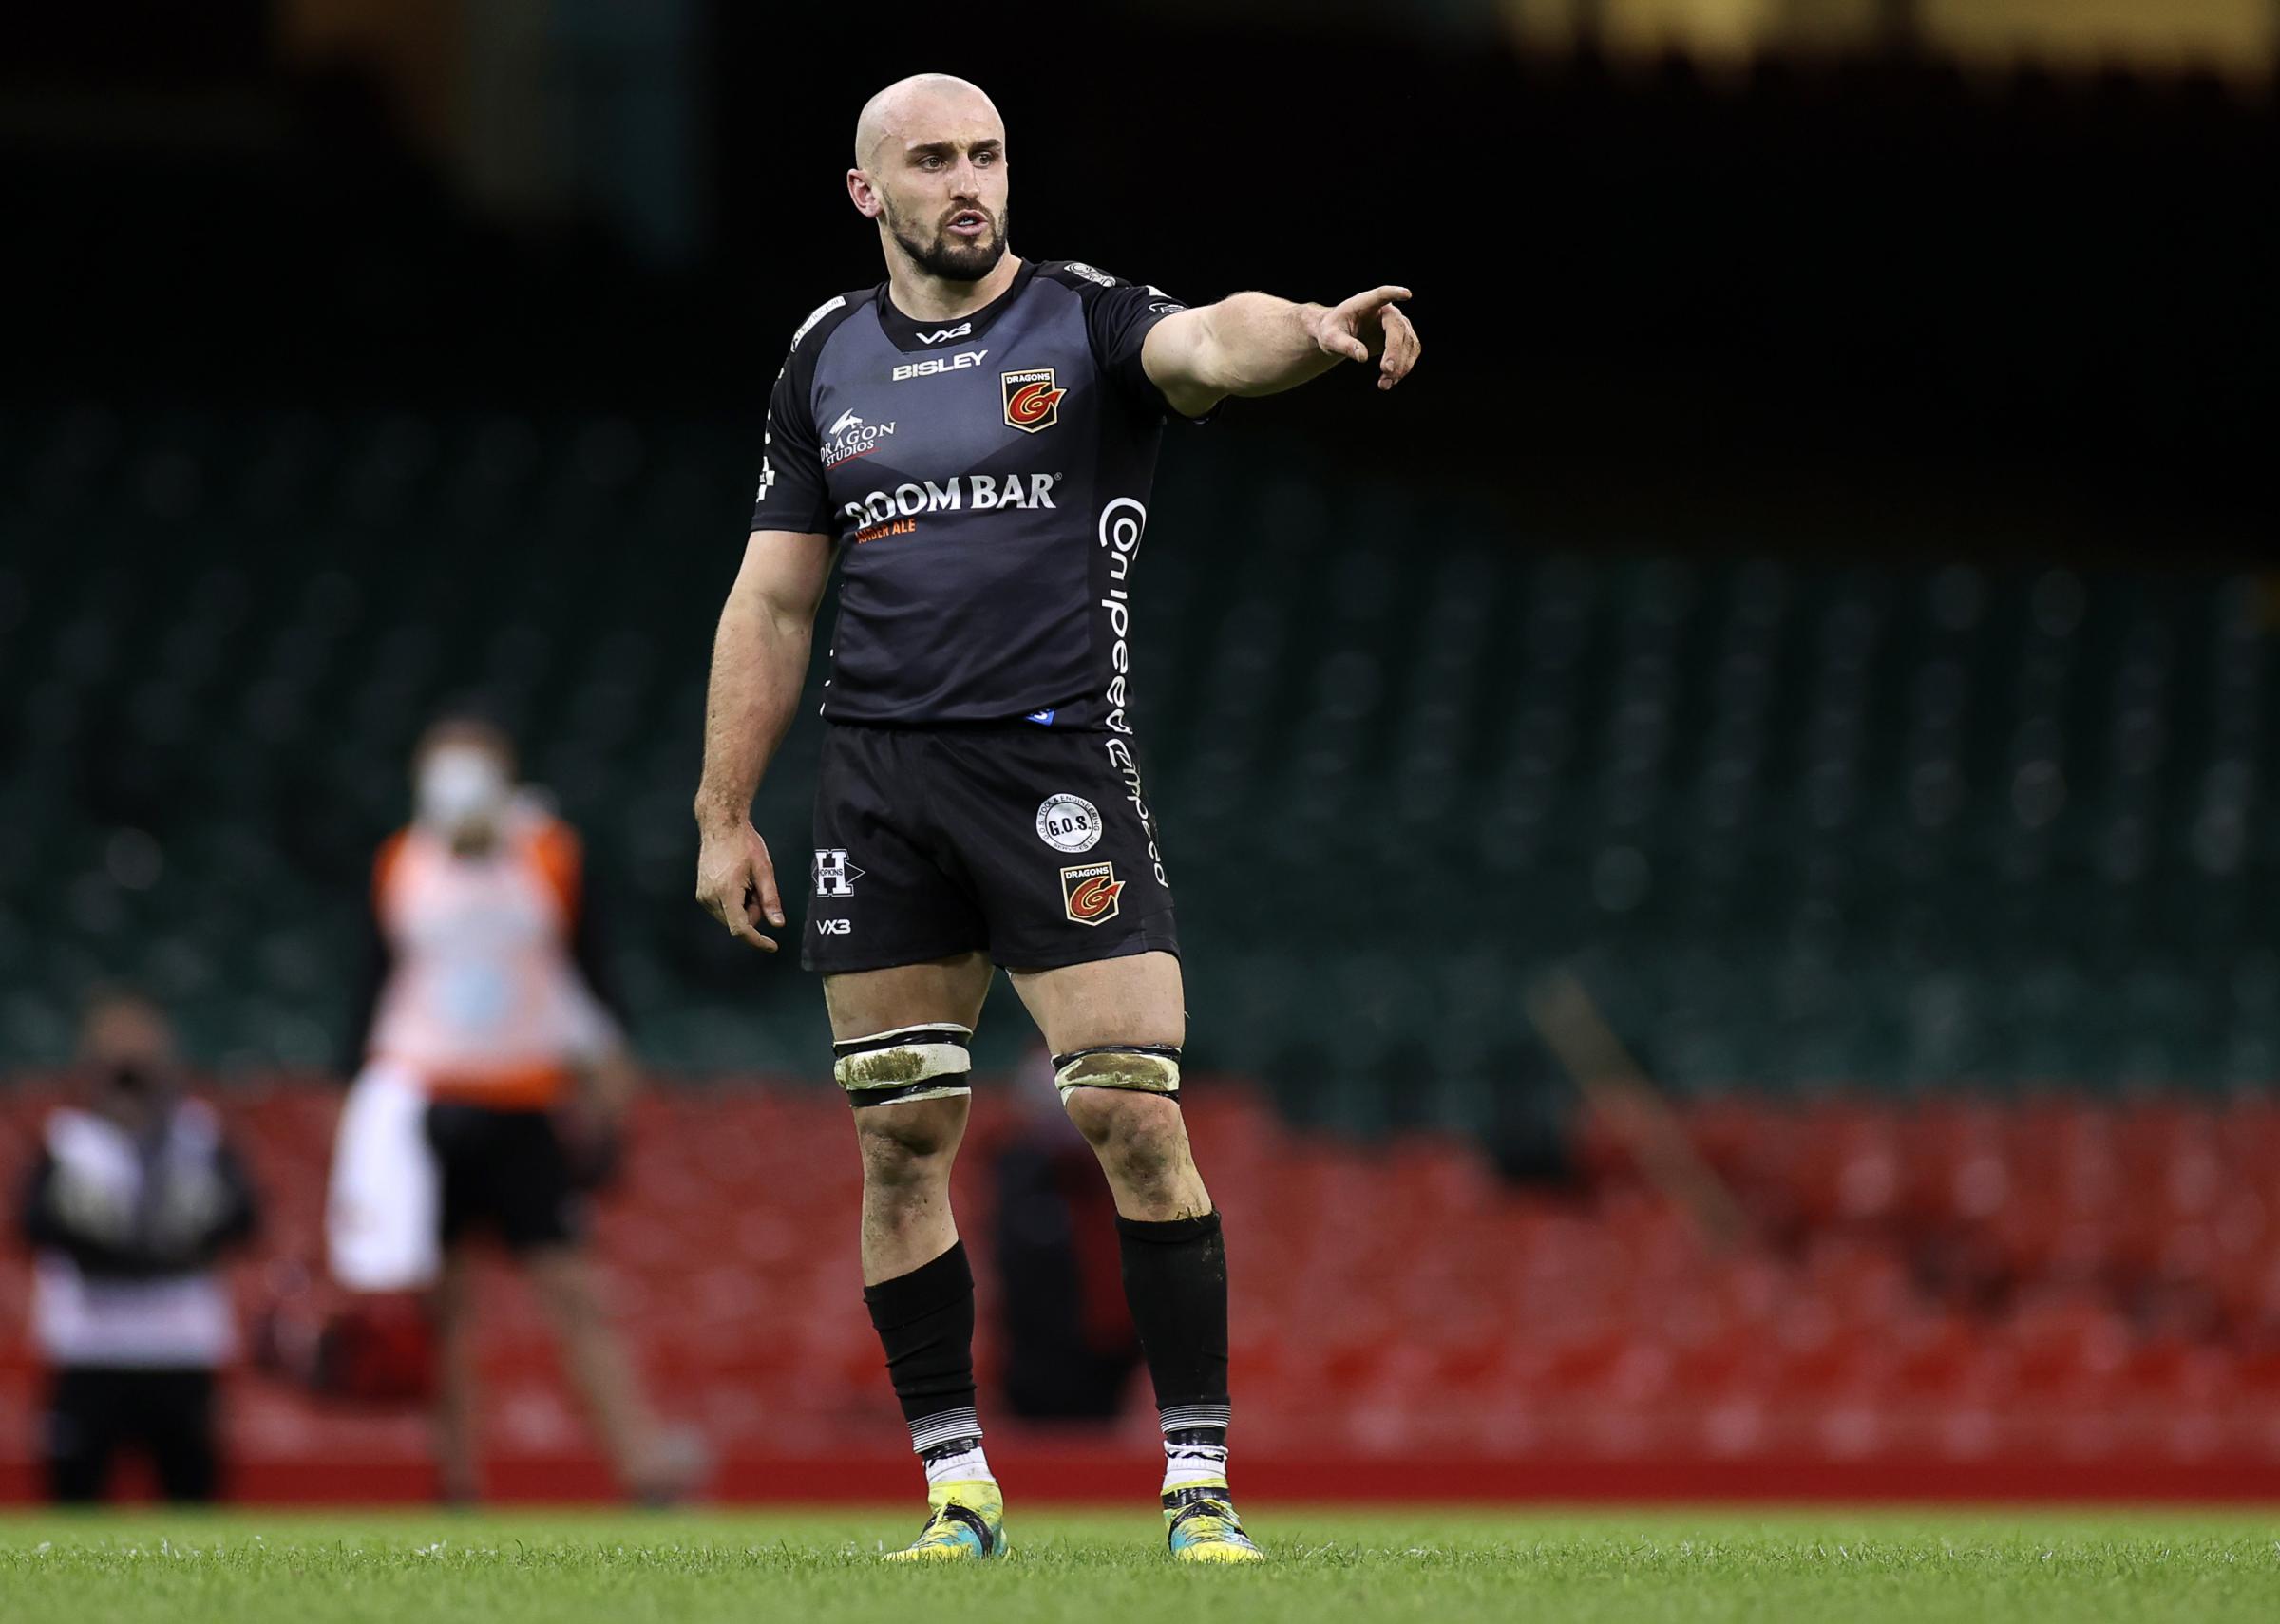 LEADER: Dragons back rower Ollie Griffiths